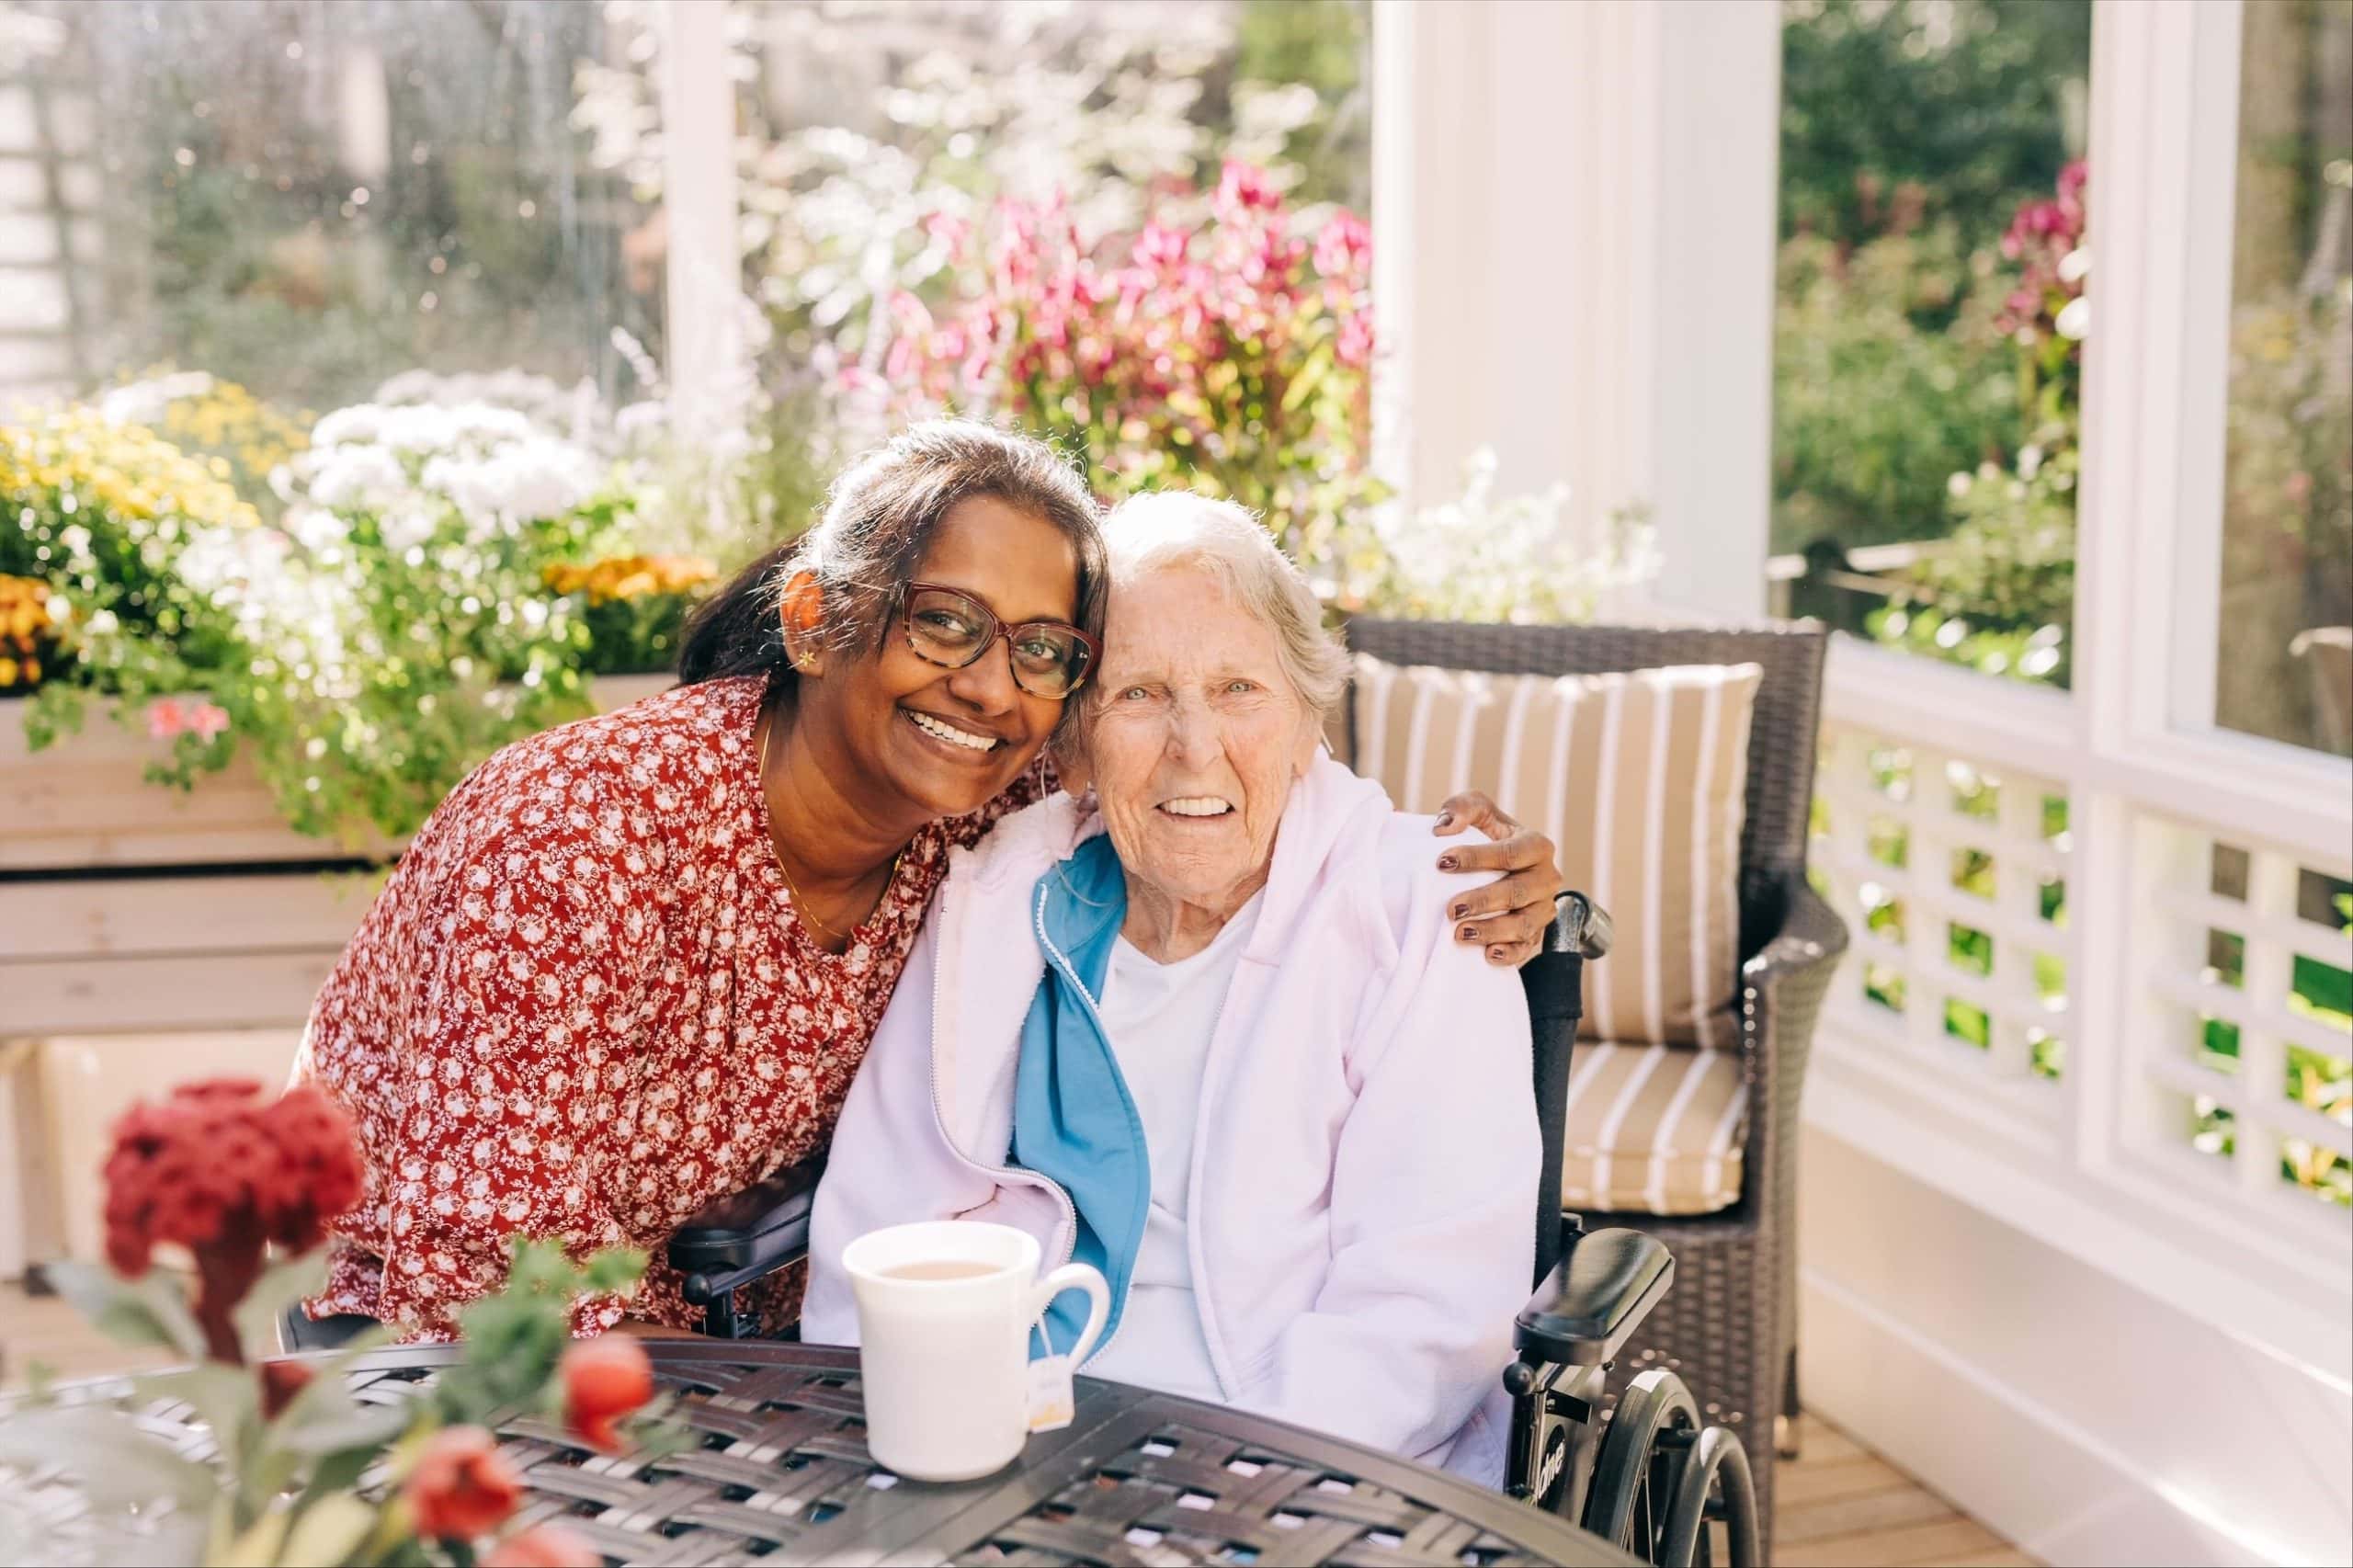 healthcare professional and resident smiling in a garden